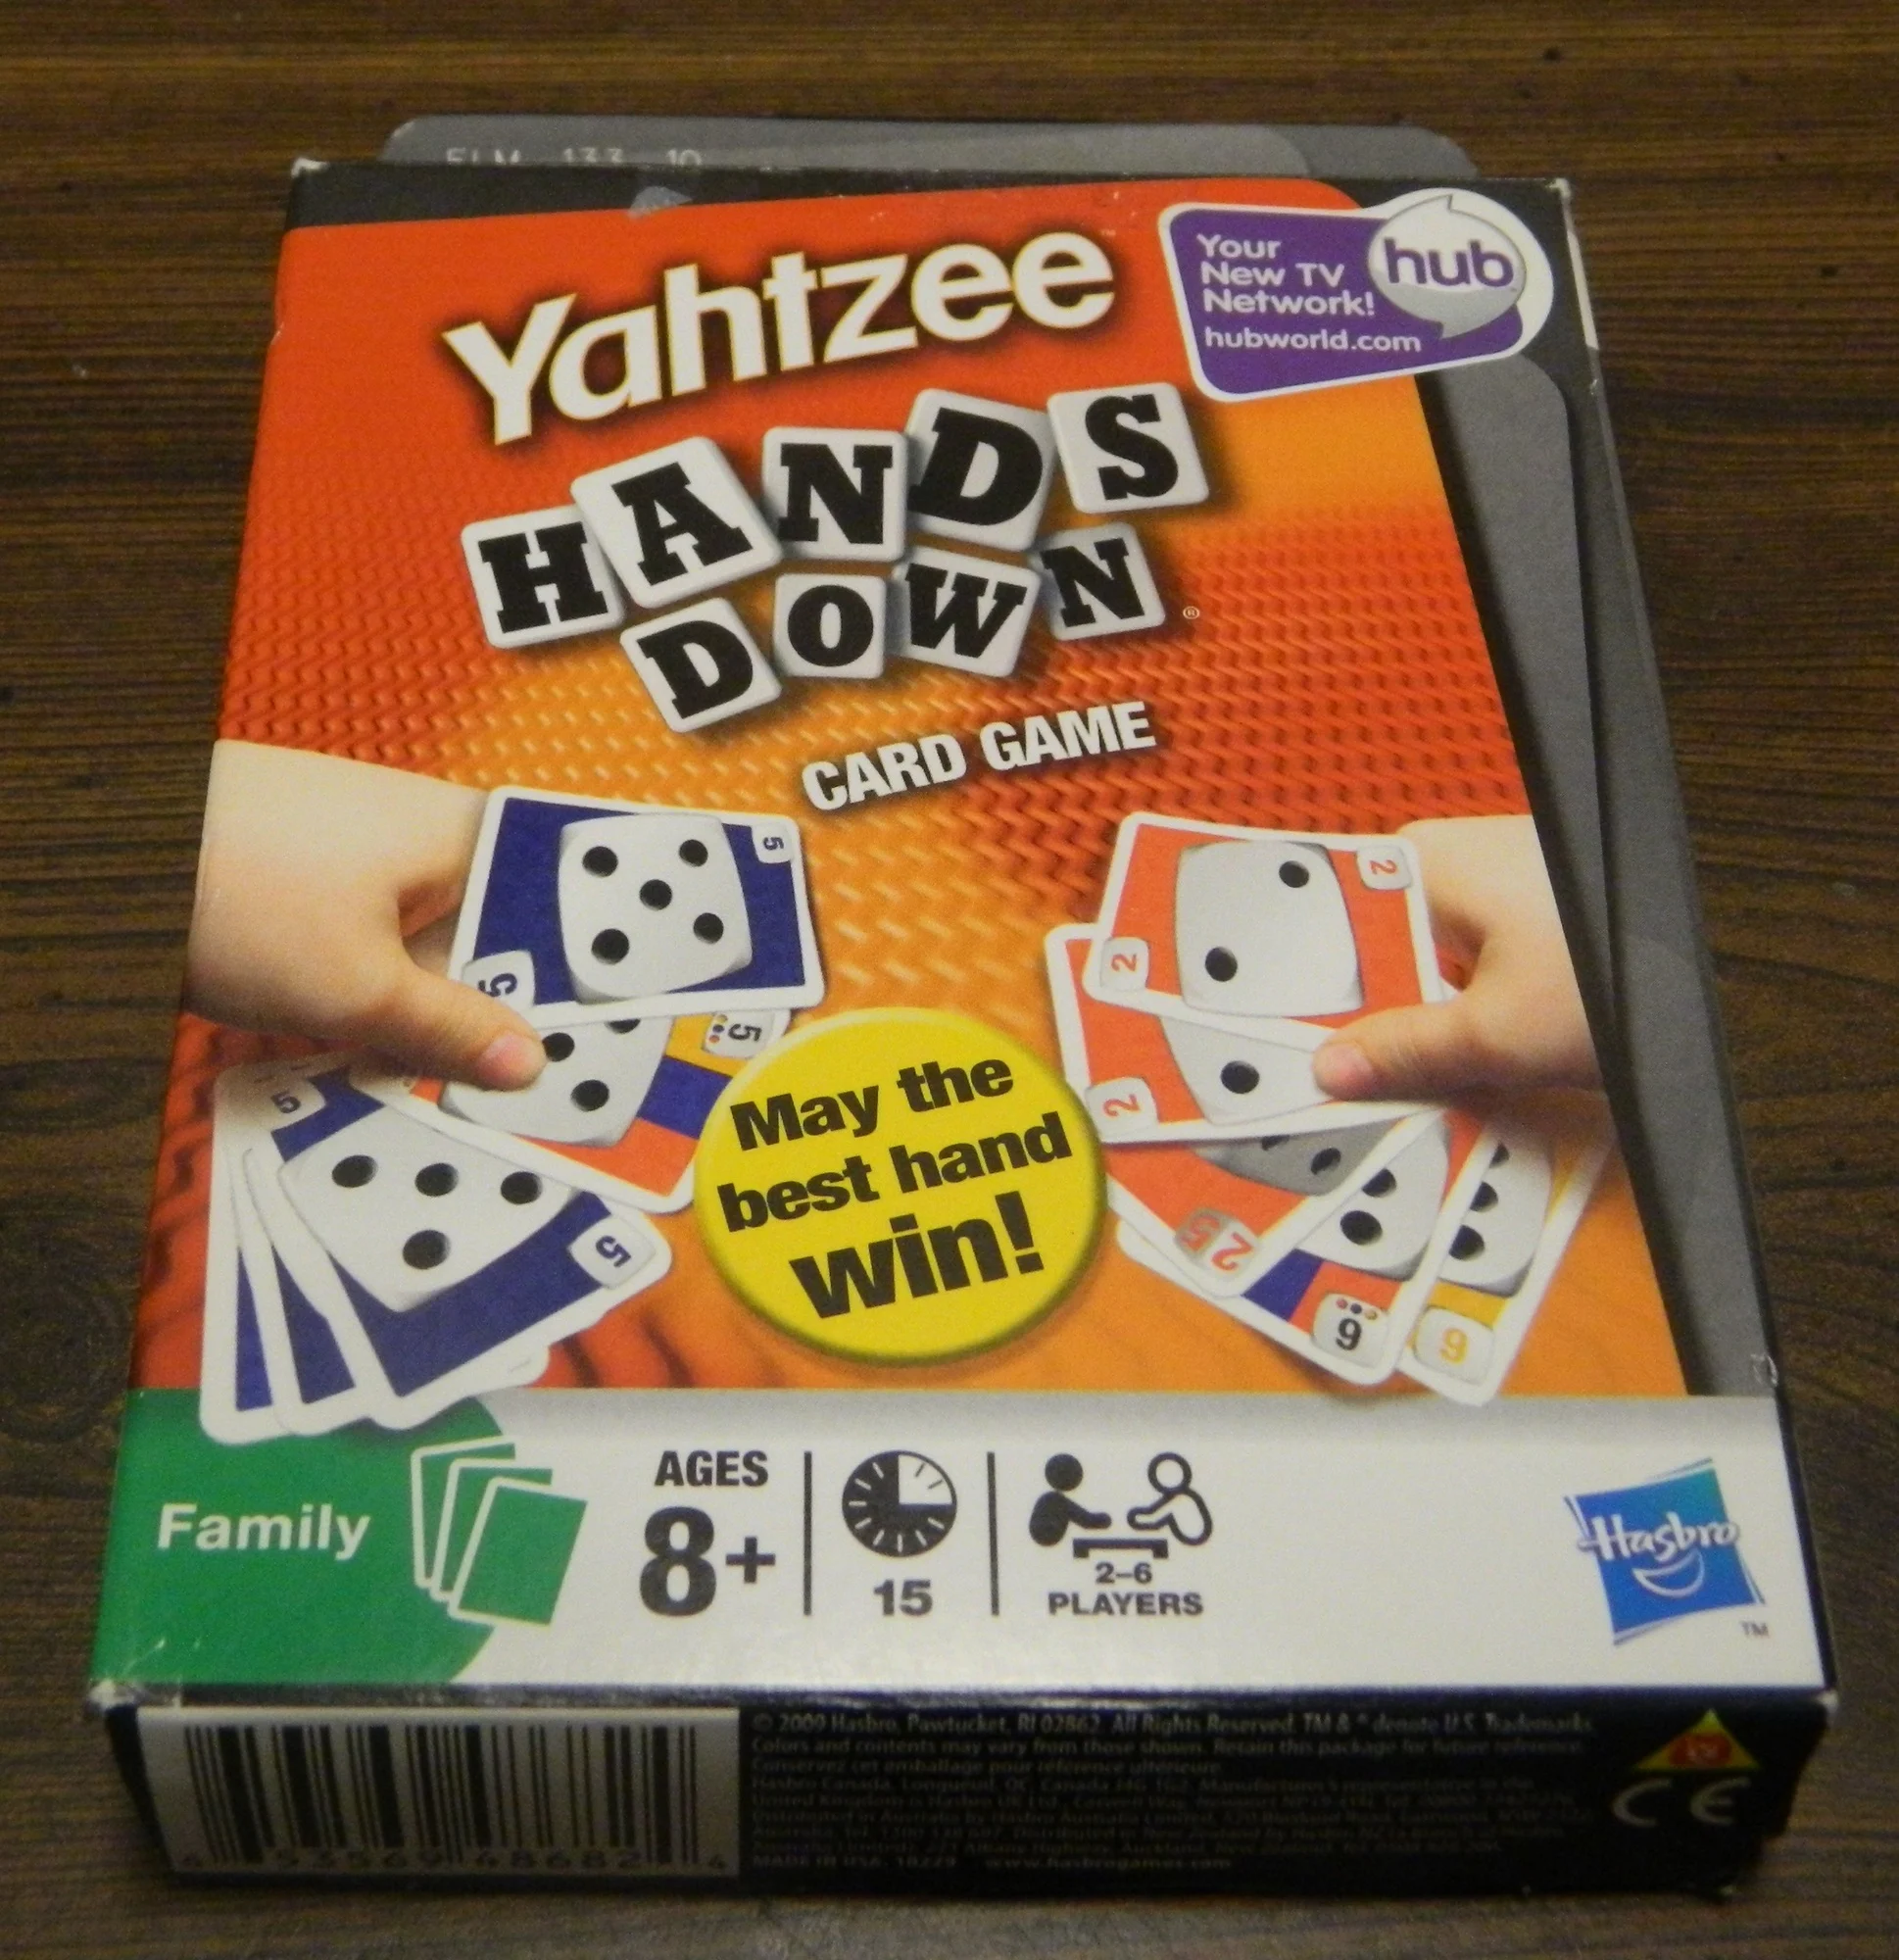 Yahtzee Hands Down Card Game, Uno Card Game, Crazy Eights Card